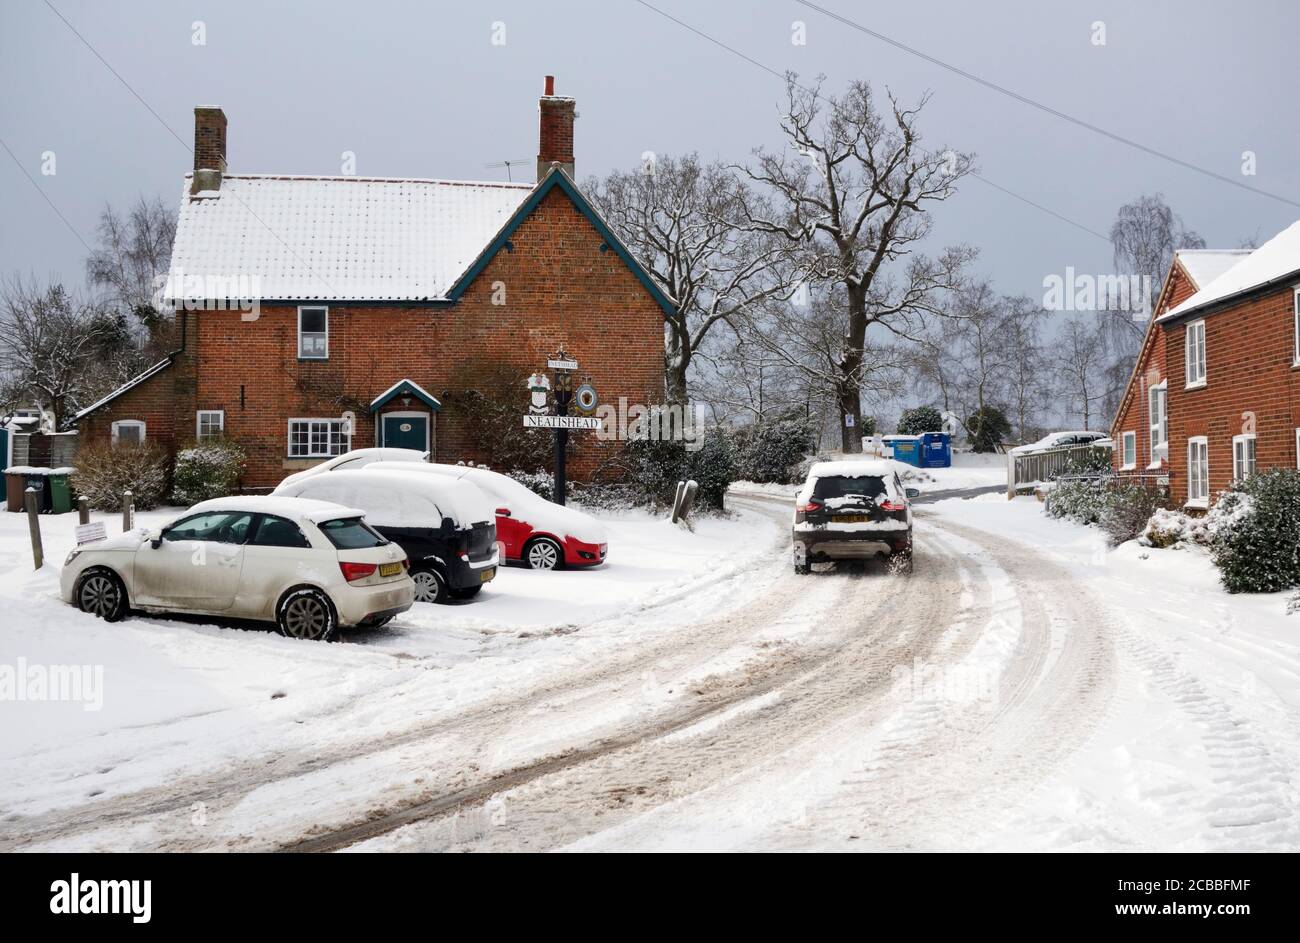 Heavy snowfall in the village of Neatishead during the winter of 2017/2018 Stock Photo